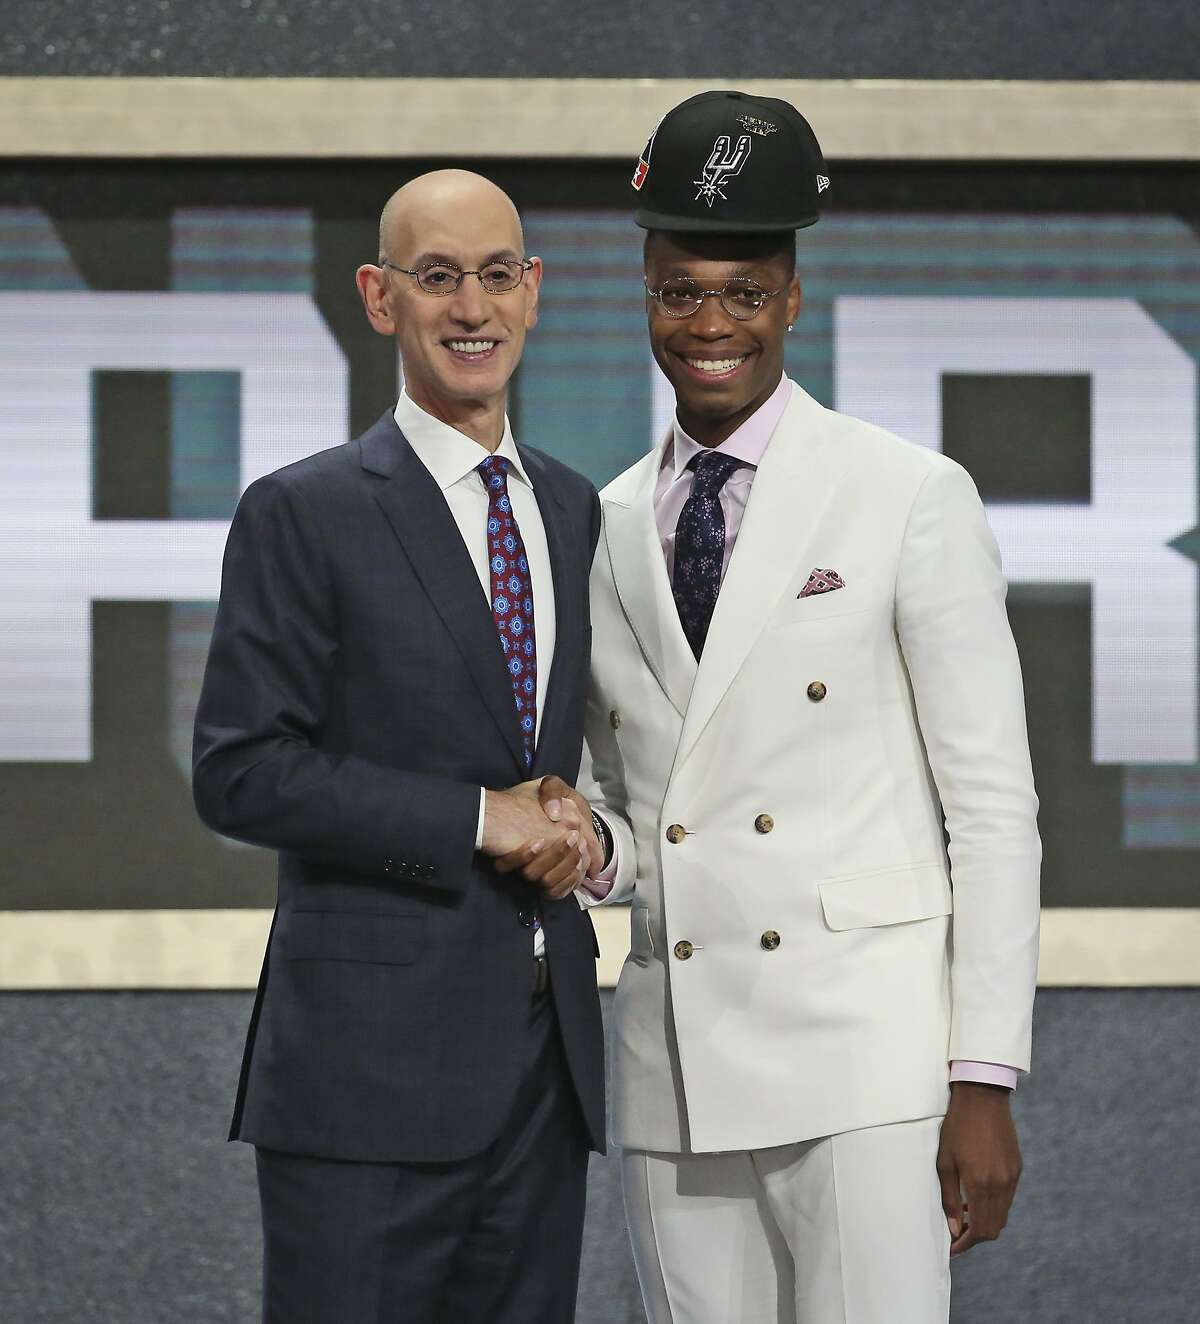 Miami's Lonnie Walker IV, right, poses with NBA Commissioner Adam Silver after he was picked 18th overall by the San Antonio Spurs during the NBA basketball draft in New York, Thursday, June 21, 2018. (AP Photo/Kevin Hagen)